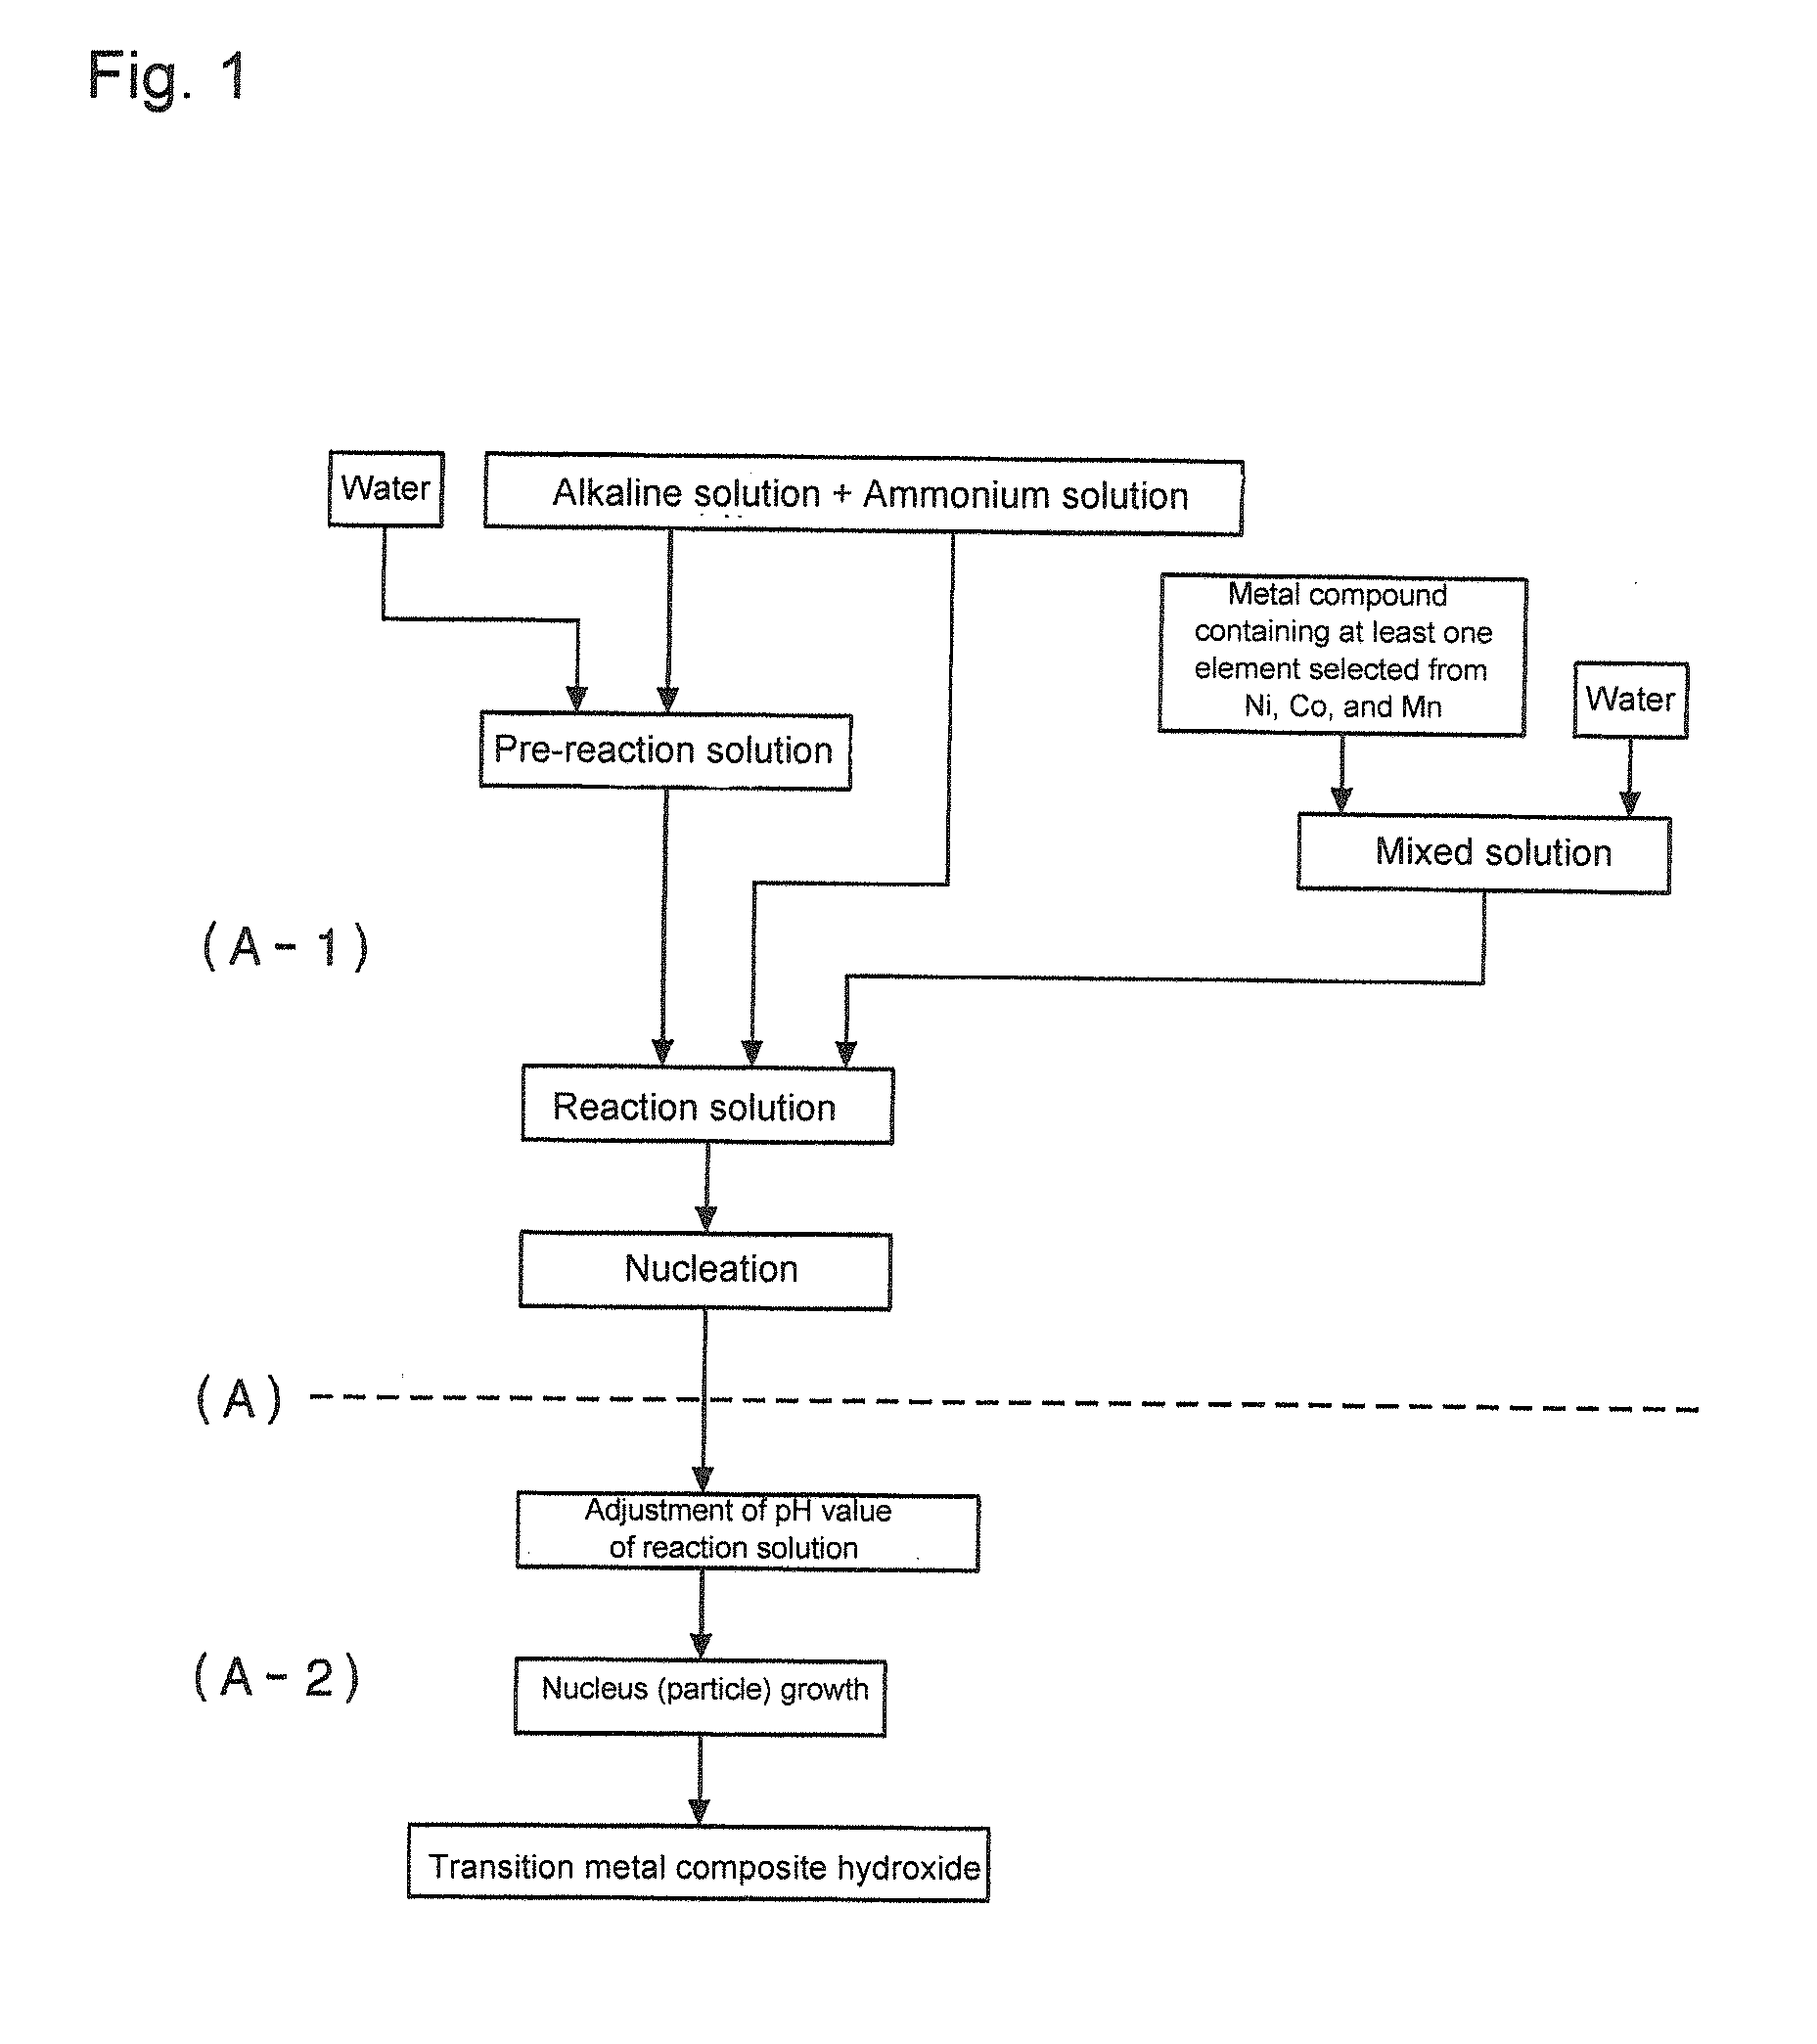 Transition metal composite hydroxide capable of serving as precursor of positive electrode active material for nonaqueous electrolyte secondary batteries, method for producing same, positive electrode active material for nonaqueous electrolyte secondary batteries, method for producing positive electrode active material, and nonaqueous electrolyte secondary battery using positive electrode active material